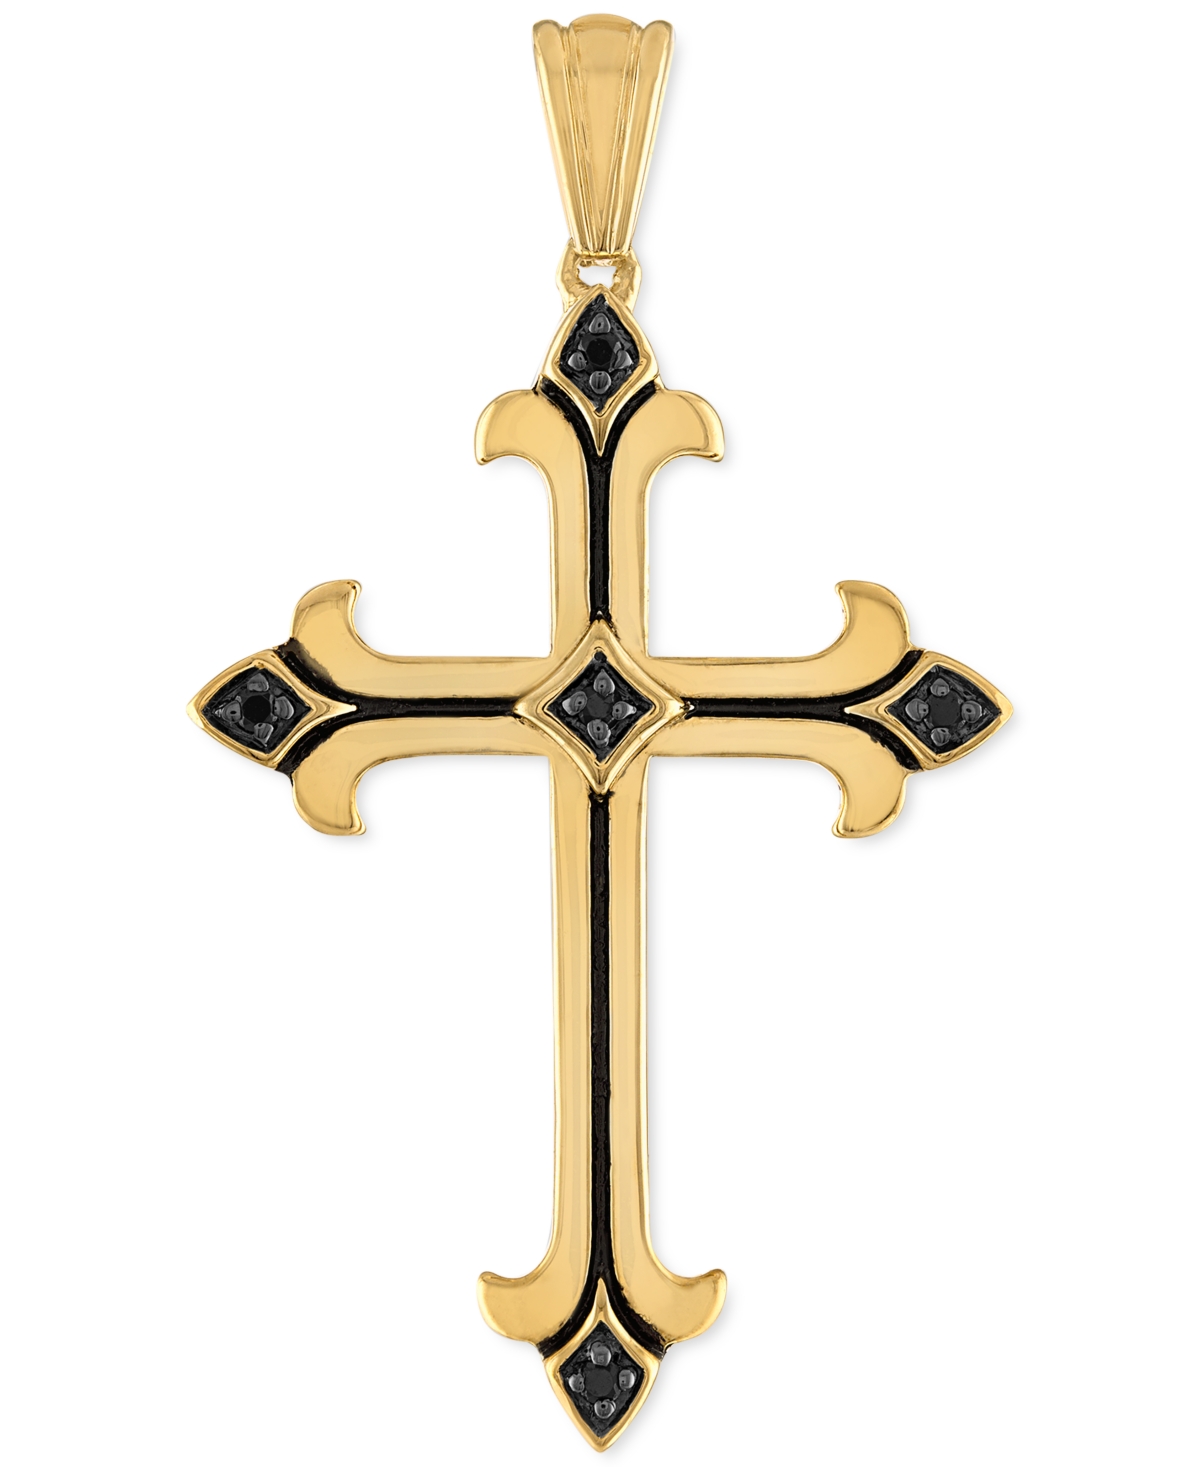 Black Cubic Zirconia Cross Pendant in 14k Gold-Plated Sterling Silver, Created for Macy's - Gold Over Silver